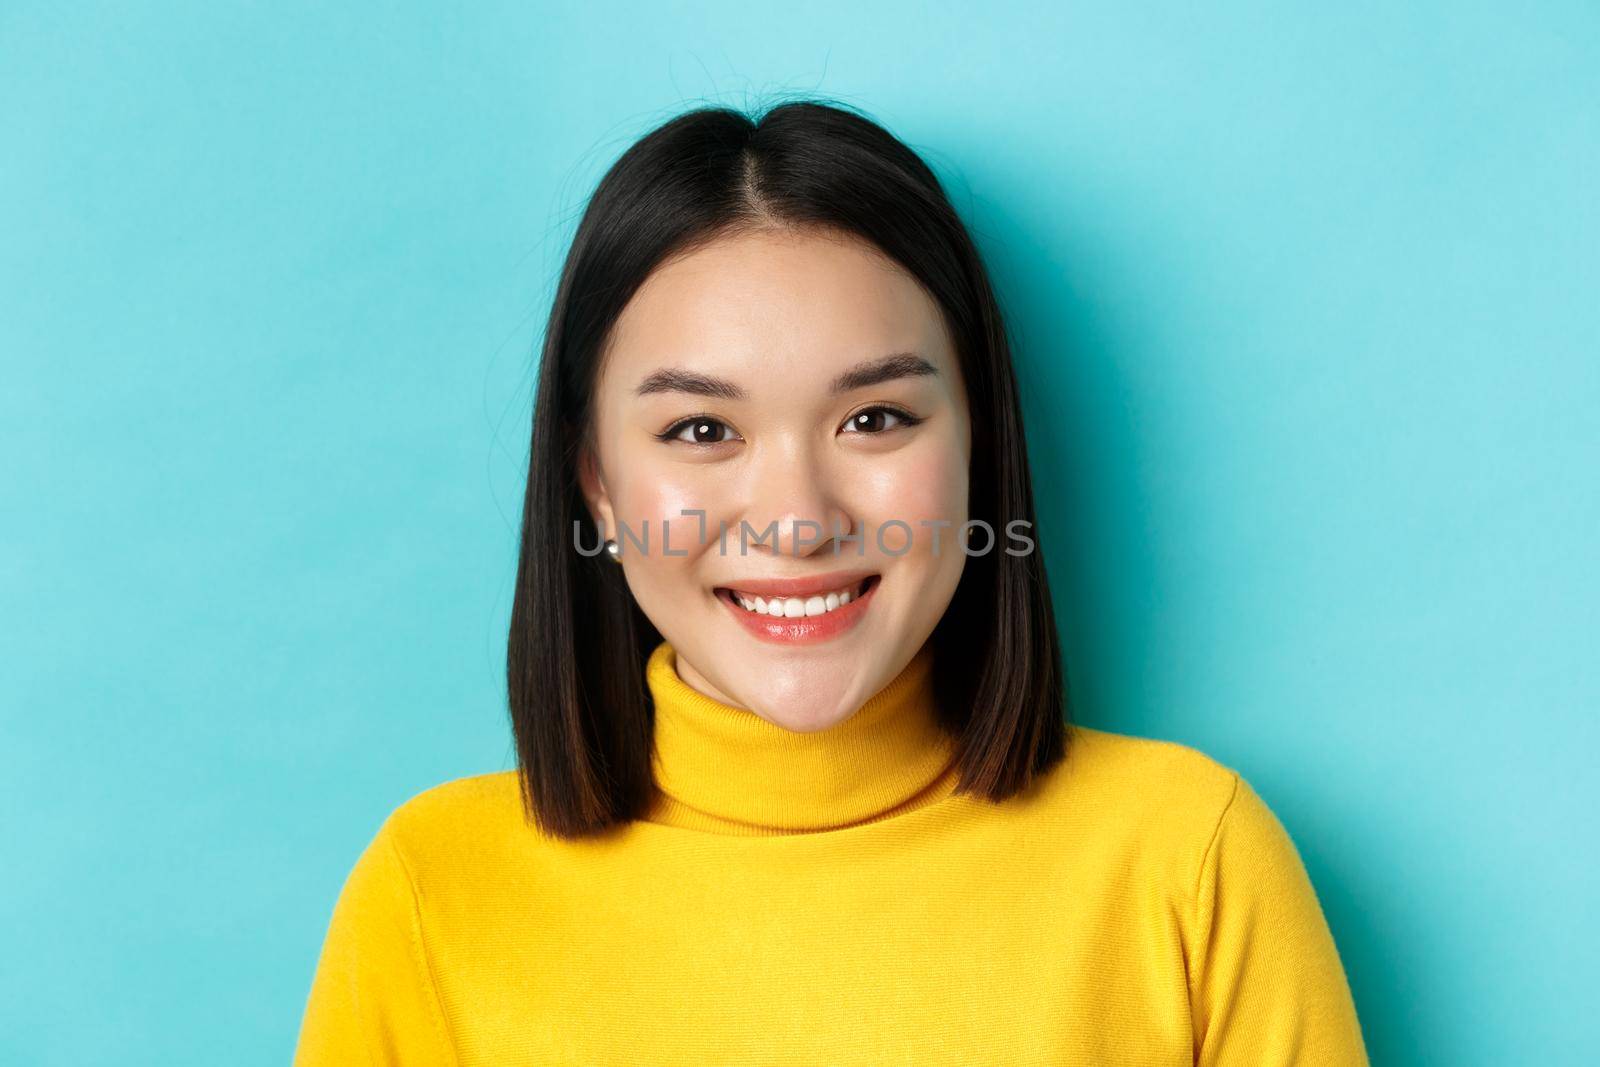 Beauty and skincare concept. Close up of smiling asian female model with perfect skin and white teeth, standing over blue background.